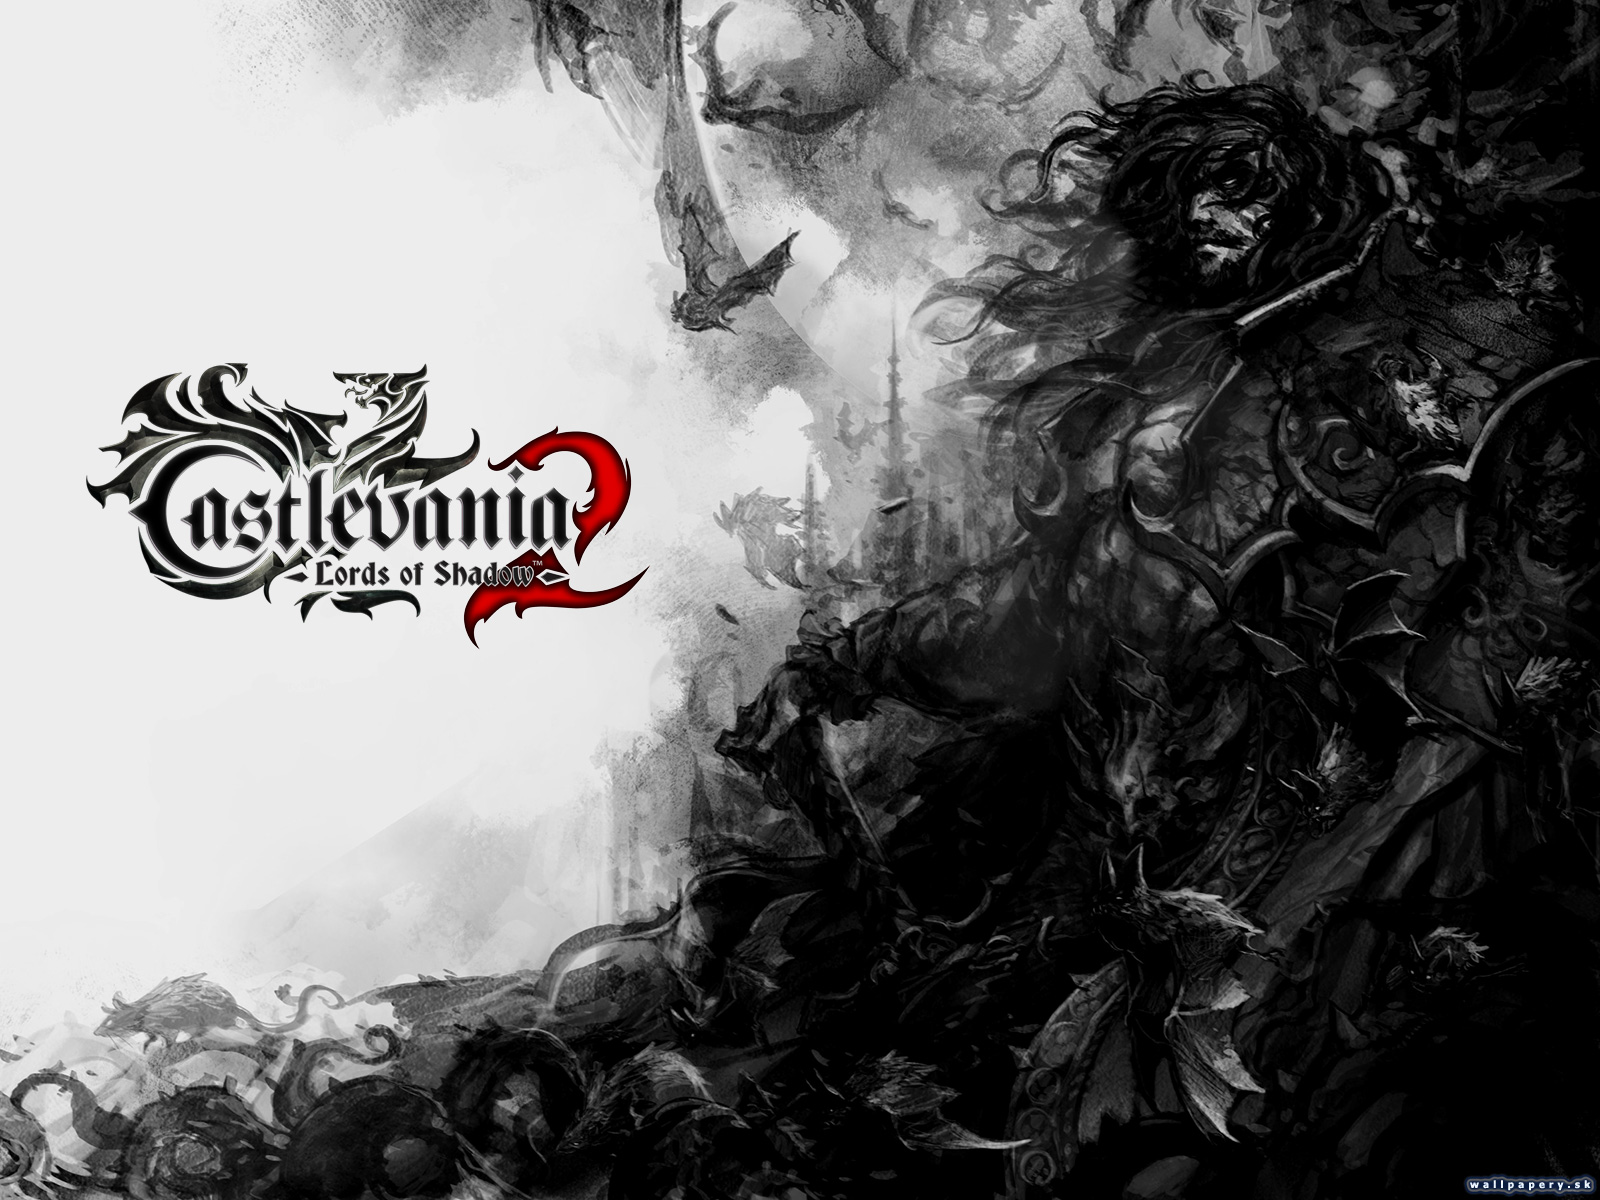 Castlevania: Lords of Shadow 2 - wallpaper 2